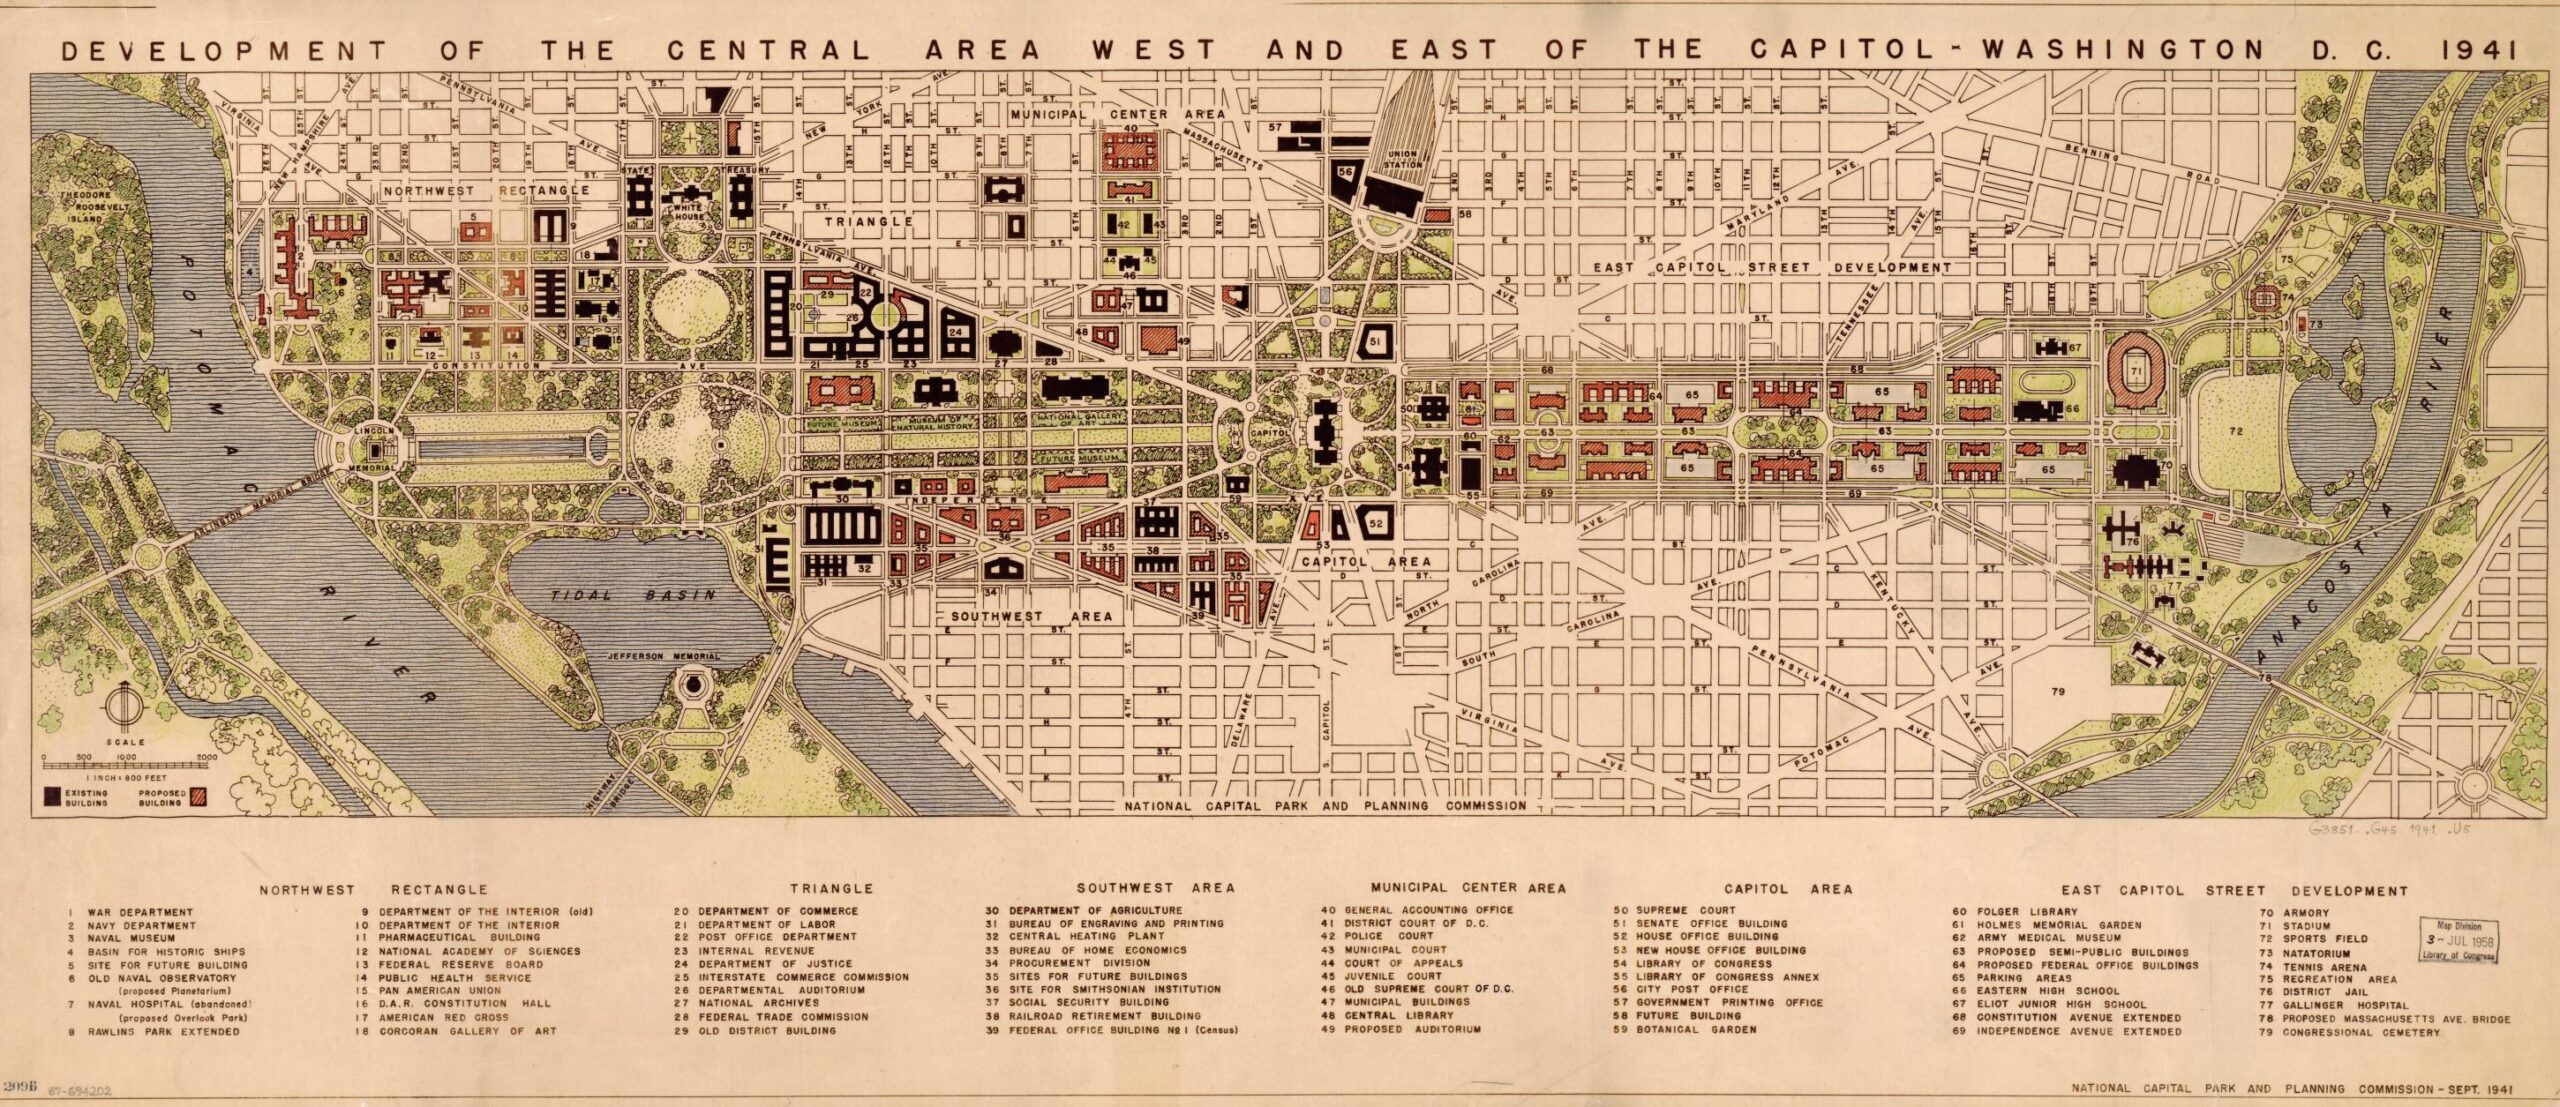 Map of 'Development of the Central Area West and East of the Capitol - Washington D.C. 1941' from the Library of Congress